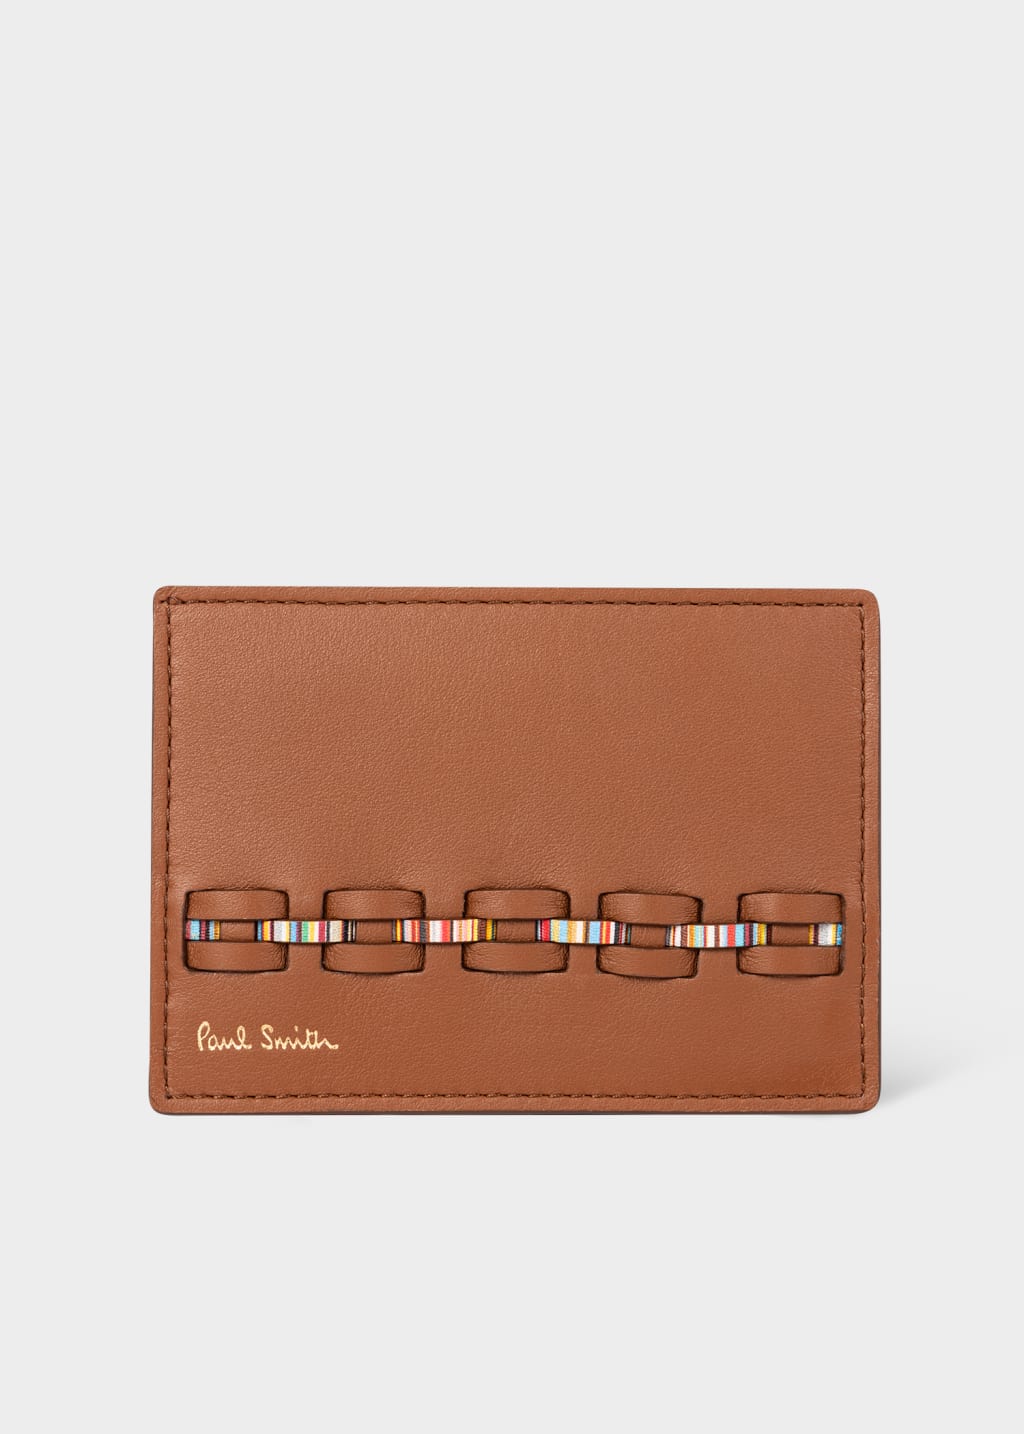 Front View - Brown Woven Front Calf Leather Credit Card Holder Paul Smith